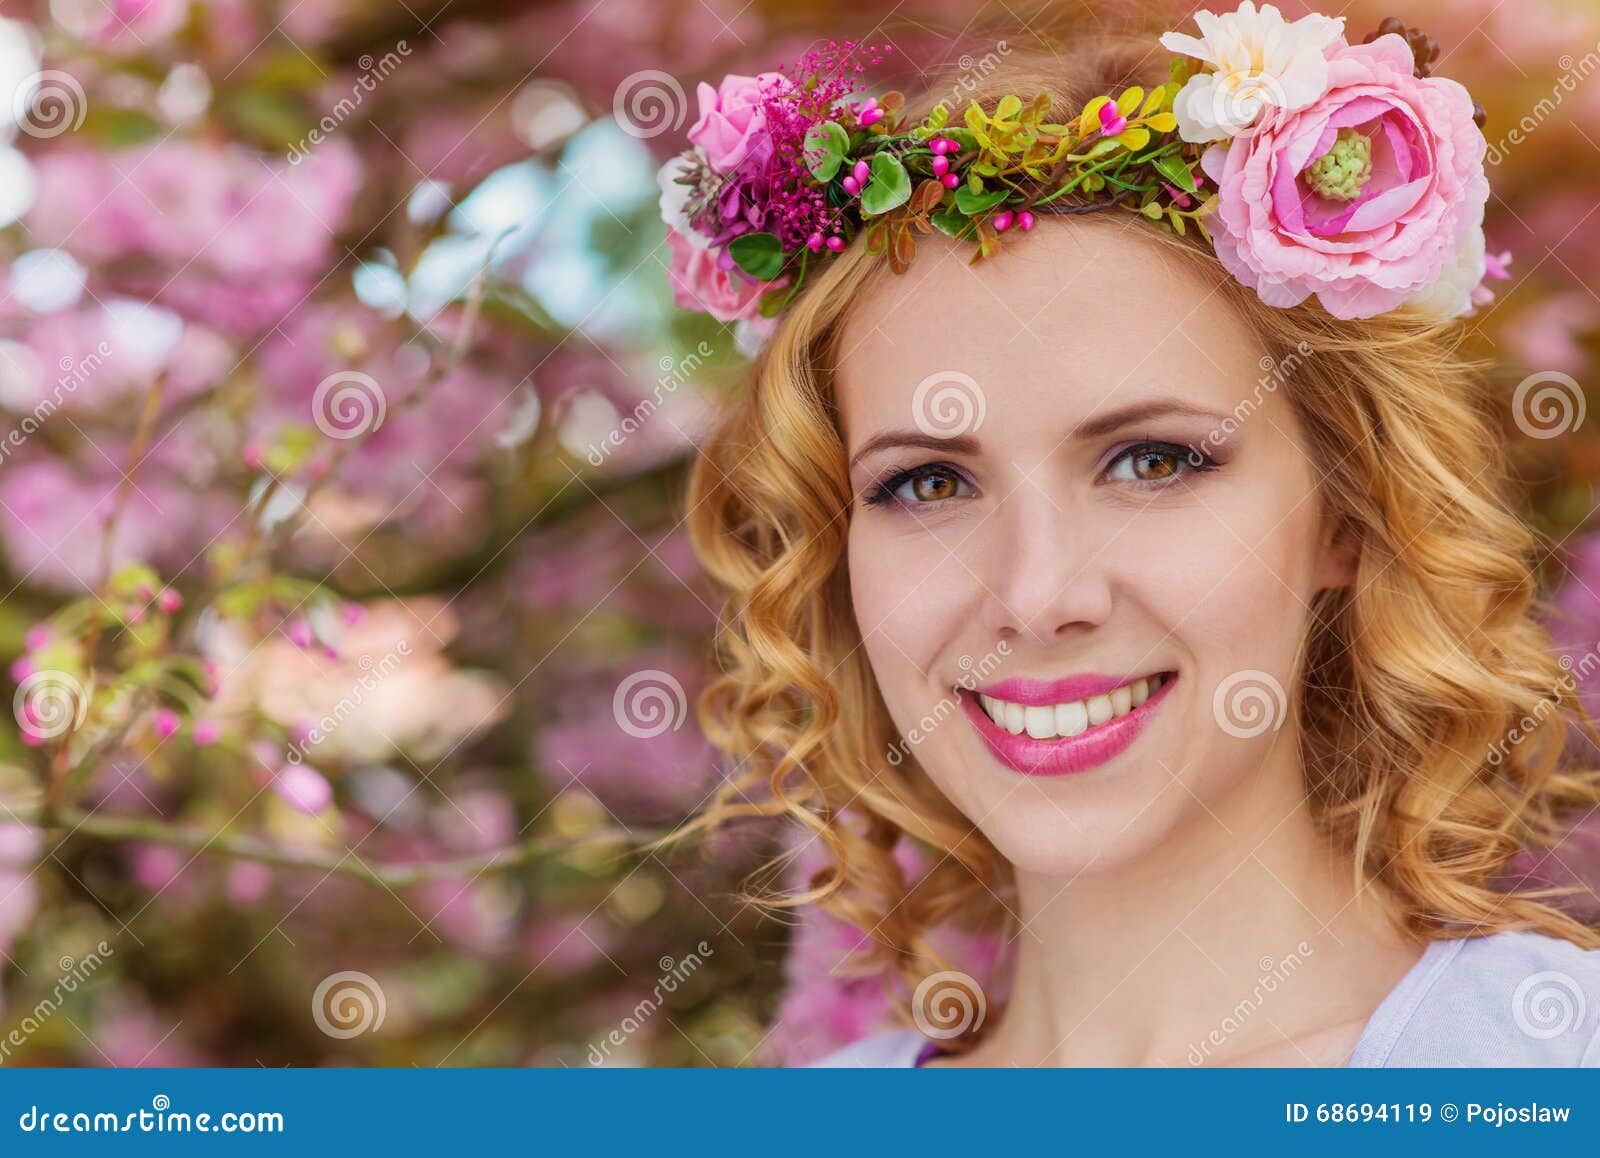 woman with flower wreath against pink tree in blossoom